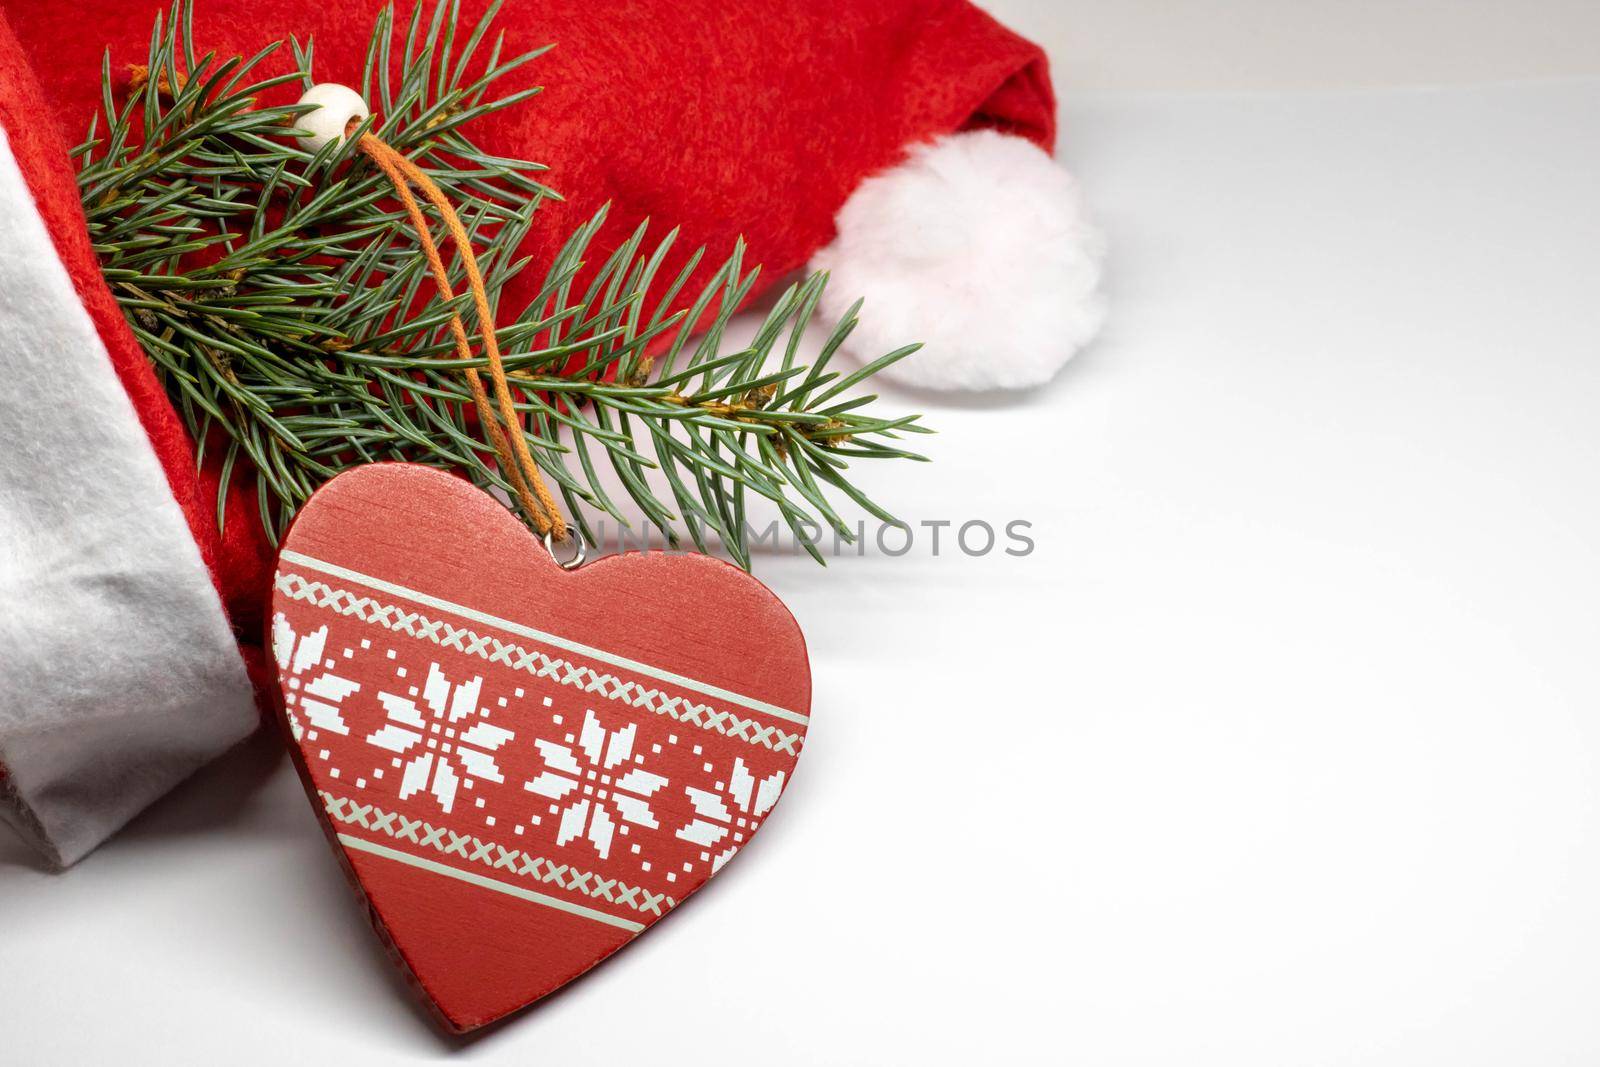 Santa Claus red cap on white background. heart